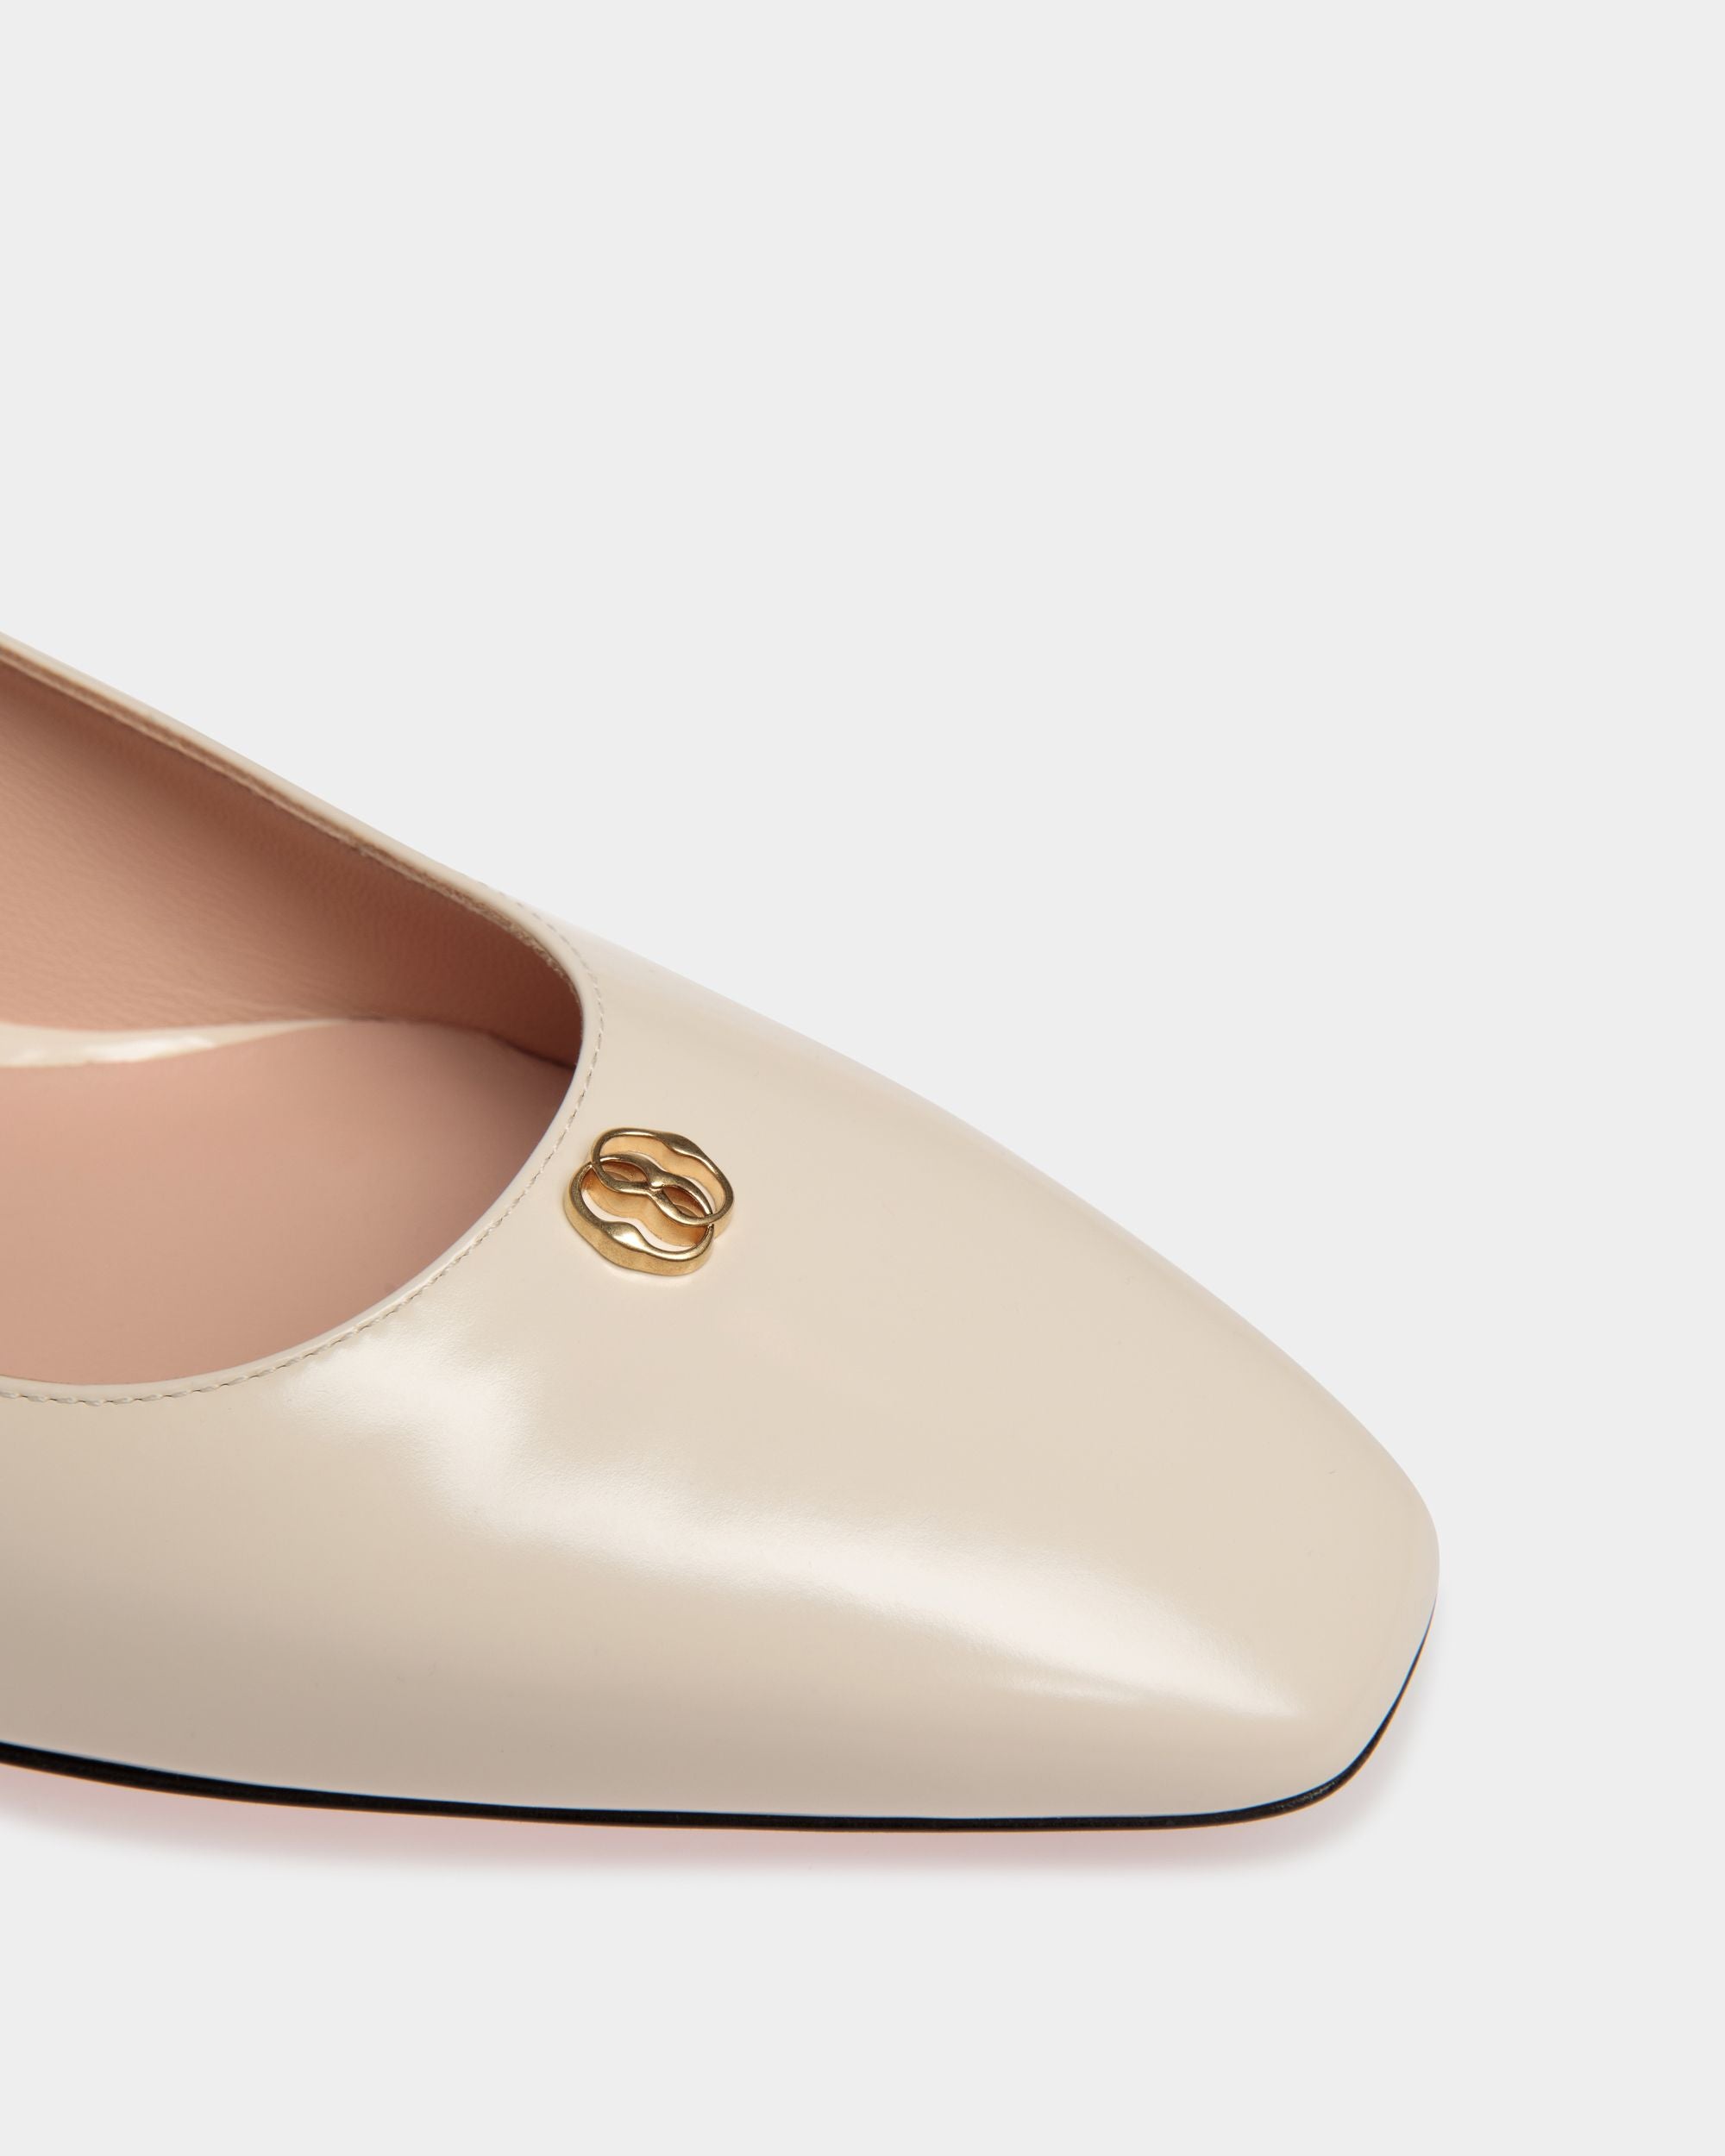 Sylt | Women's Pump in White Leather | Bally | Still Life Detail